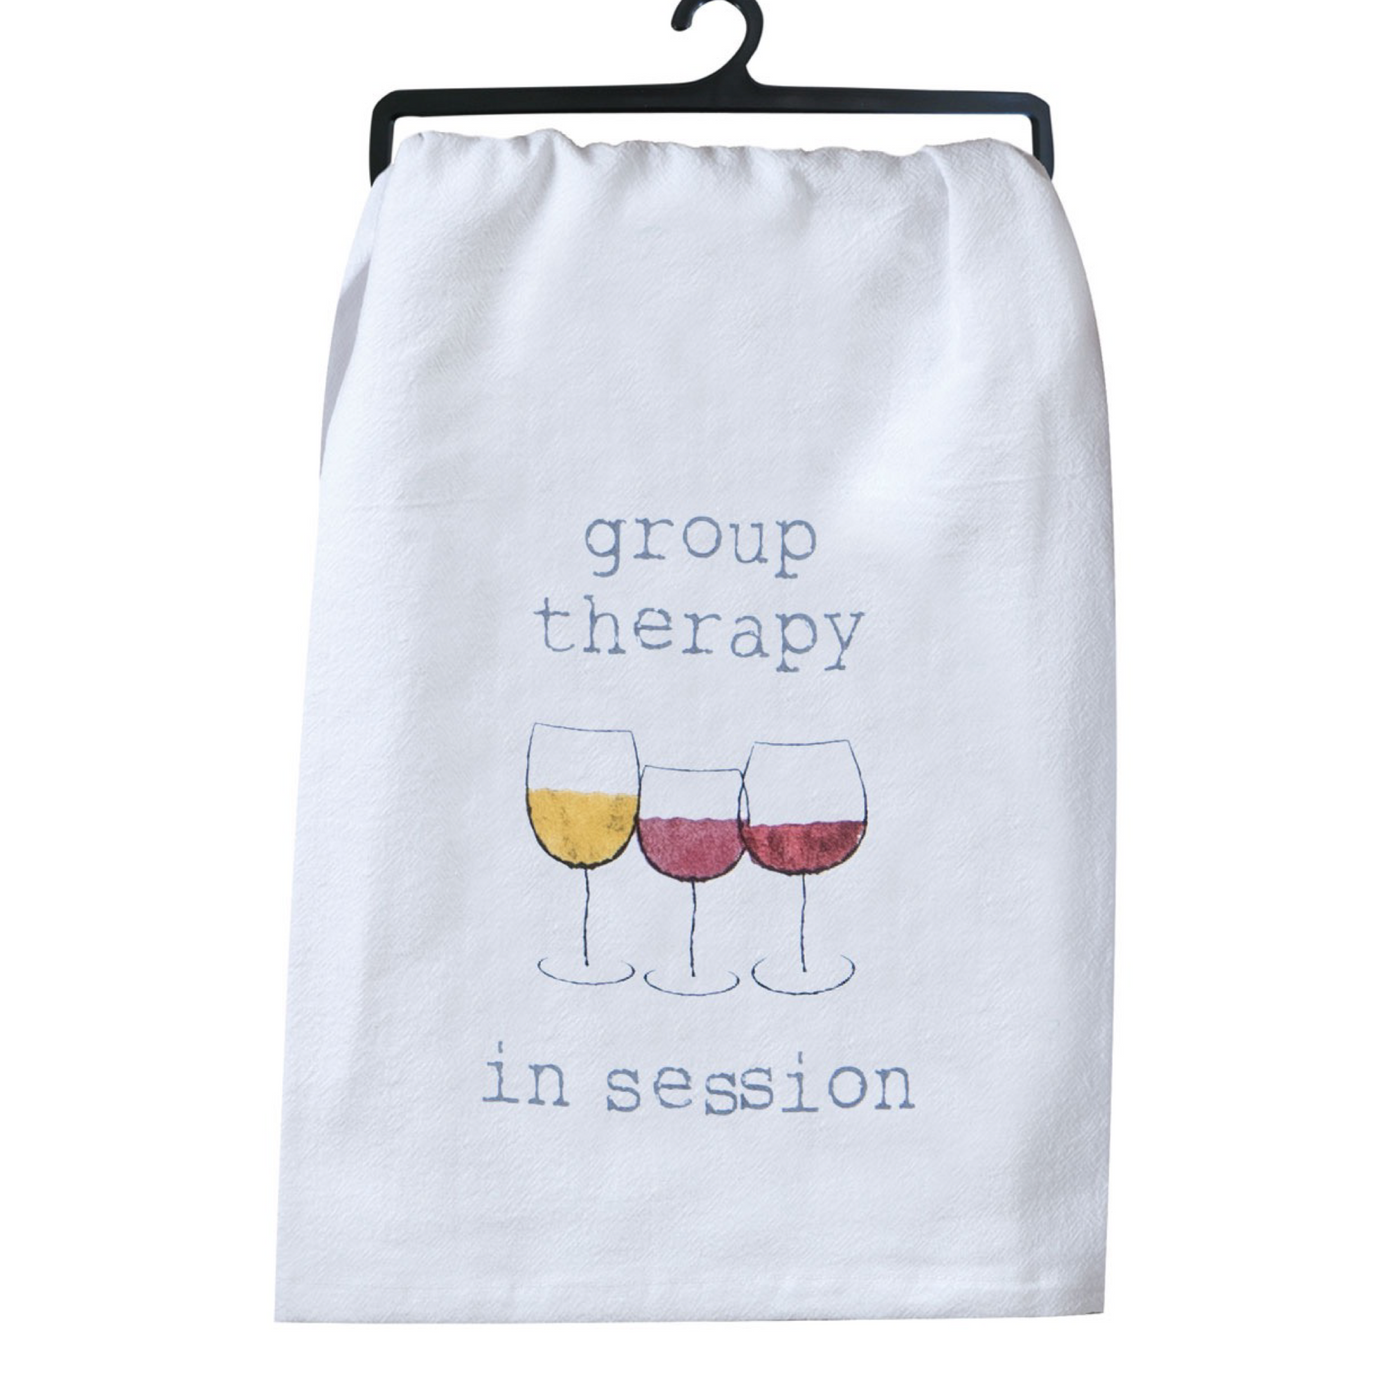 White tea towel pictures wine glasses and reads group therapy in session